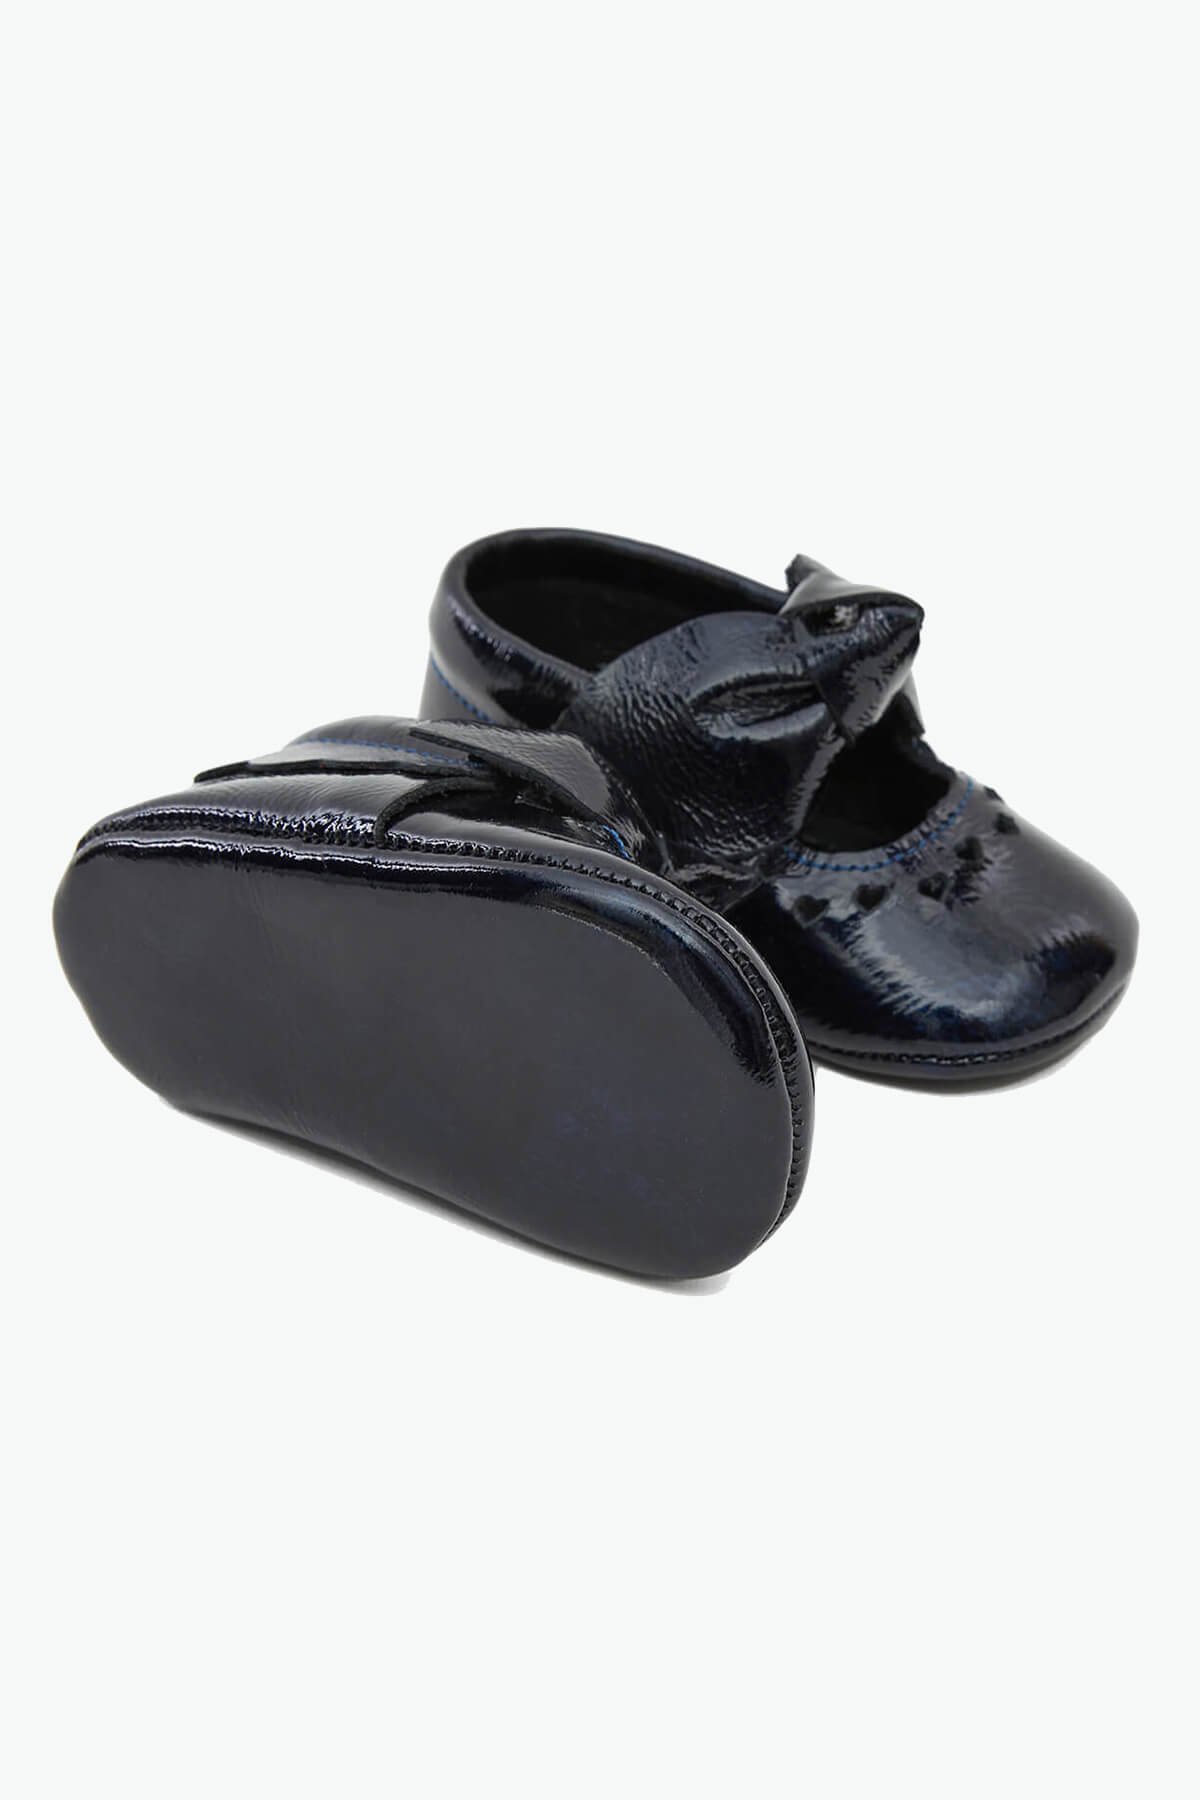 Heart Genuine Leather Baby Shoes Navy Blue